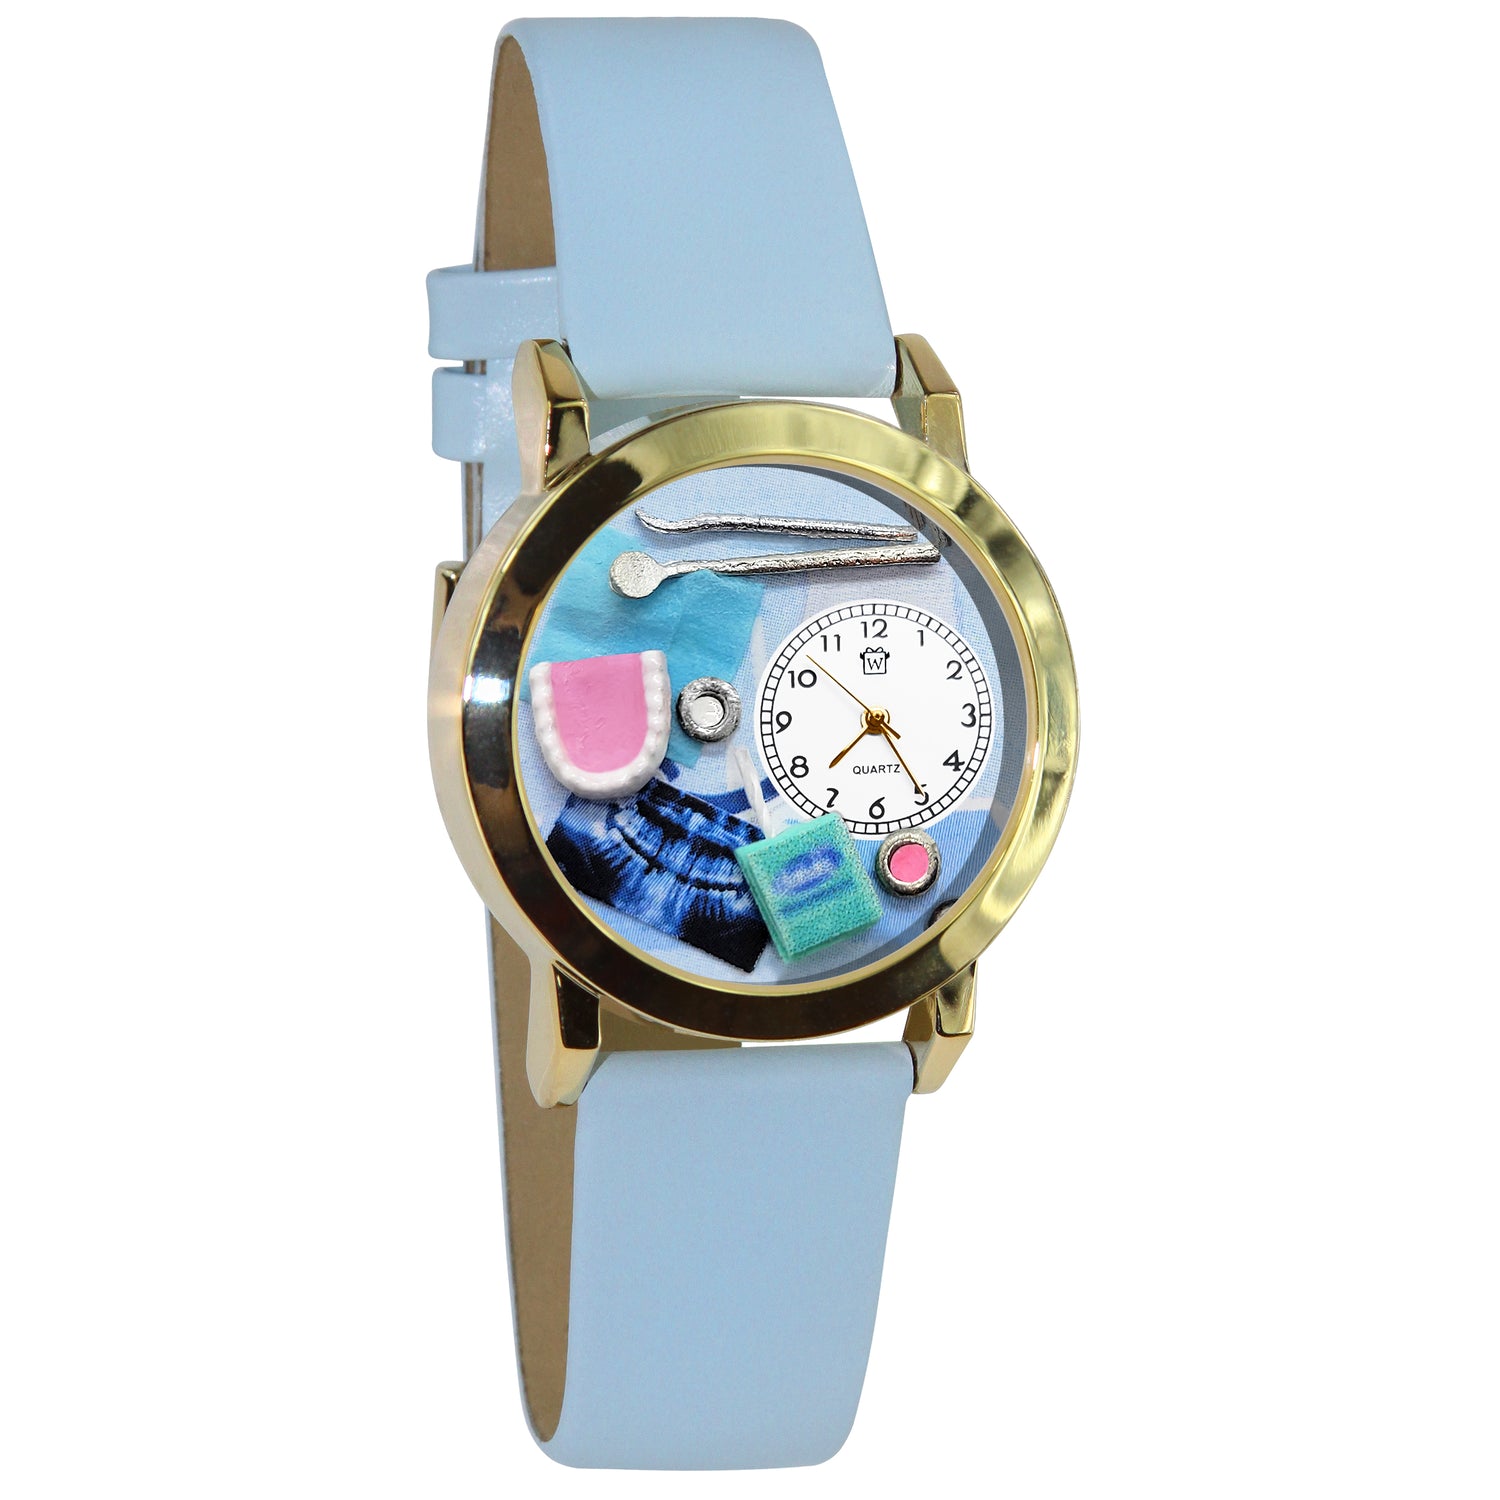 Whimsical Gifts | Dentist Dental Hygienist 3D Watch Small Style | Handmade in USA | Professions Themed | Dental Professions | Novelty Unique Fun Miniatures Gift | Gold Finish Light Blue Leather Watch Band